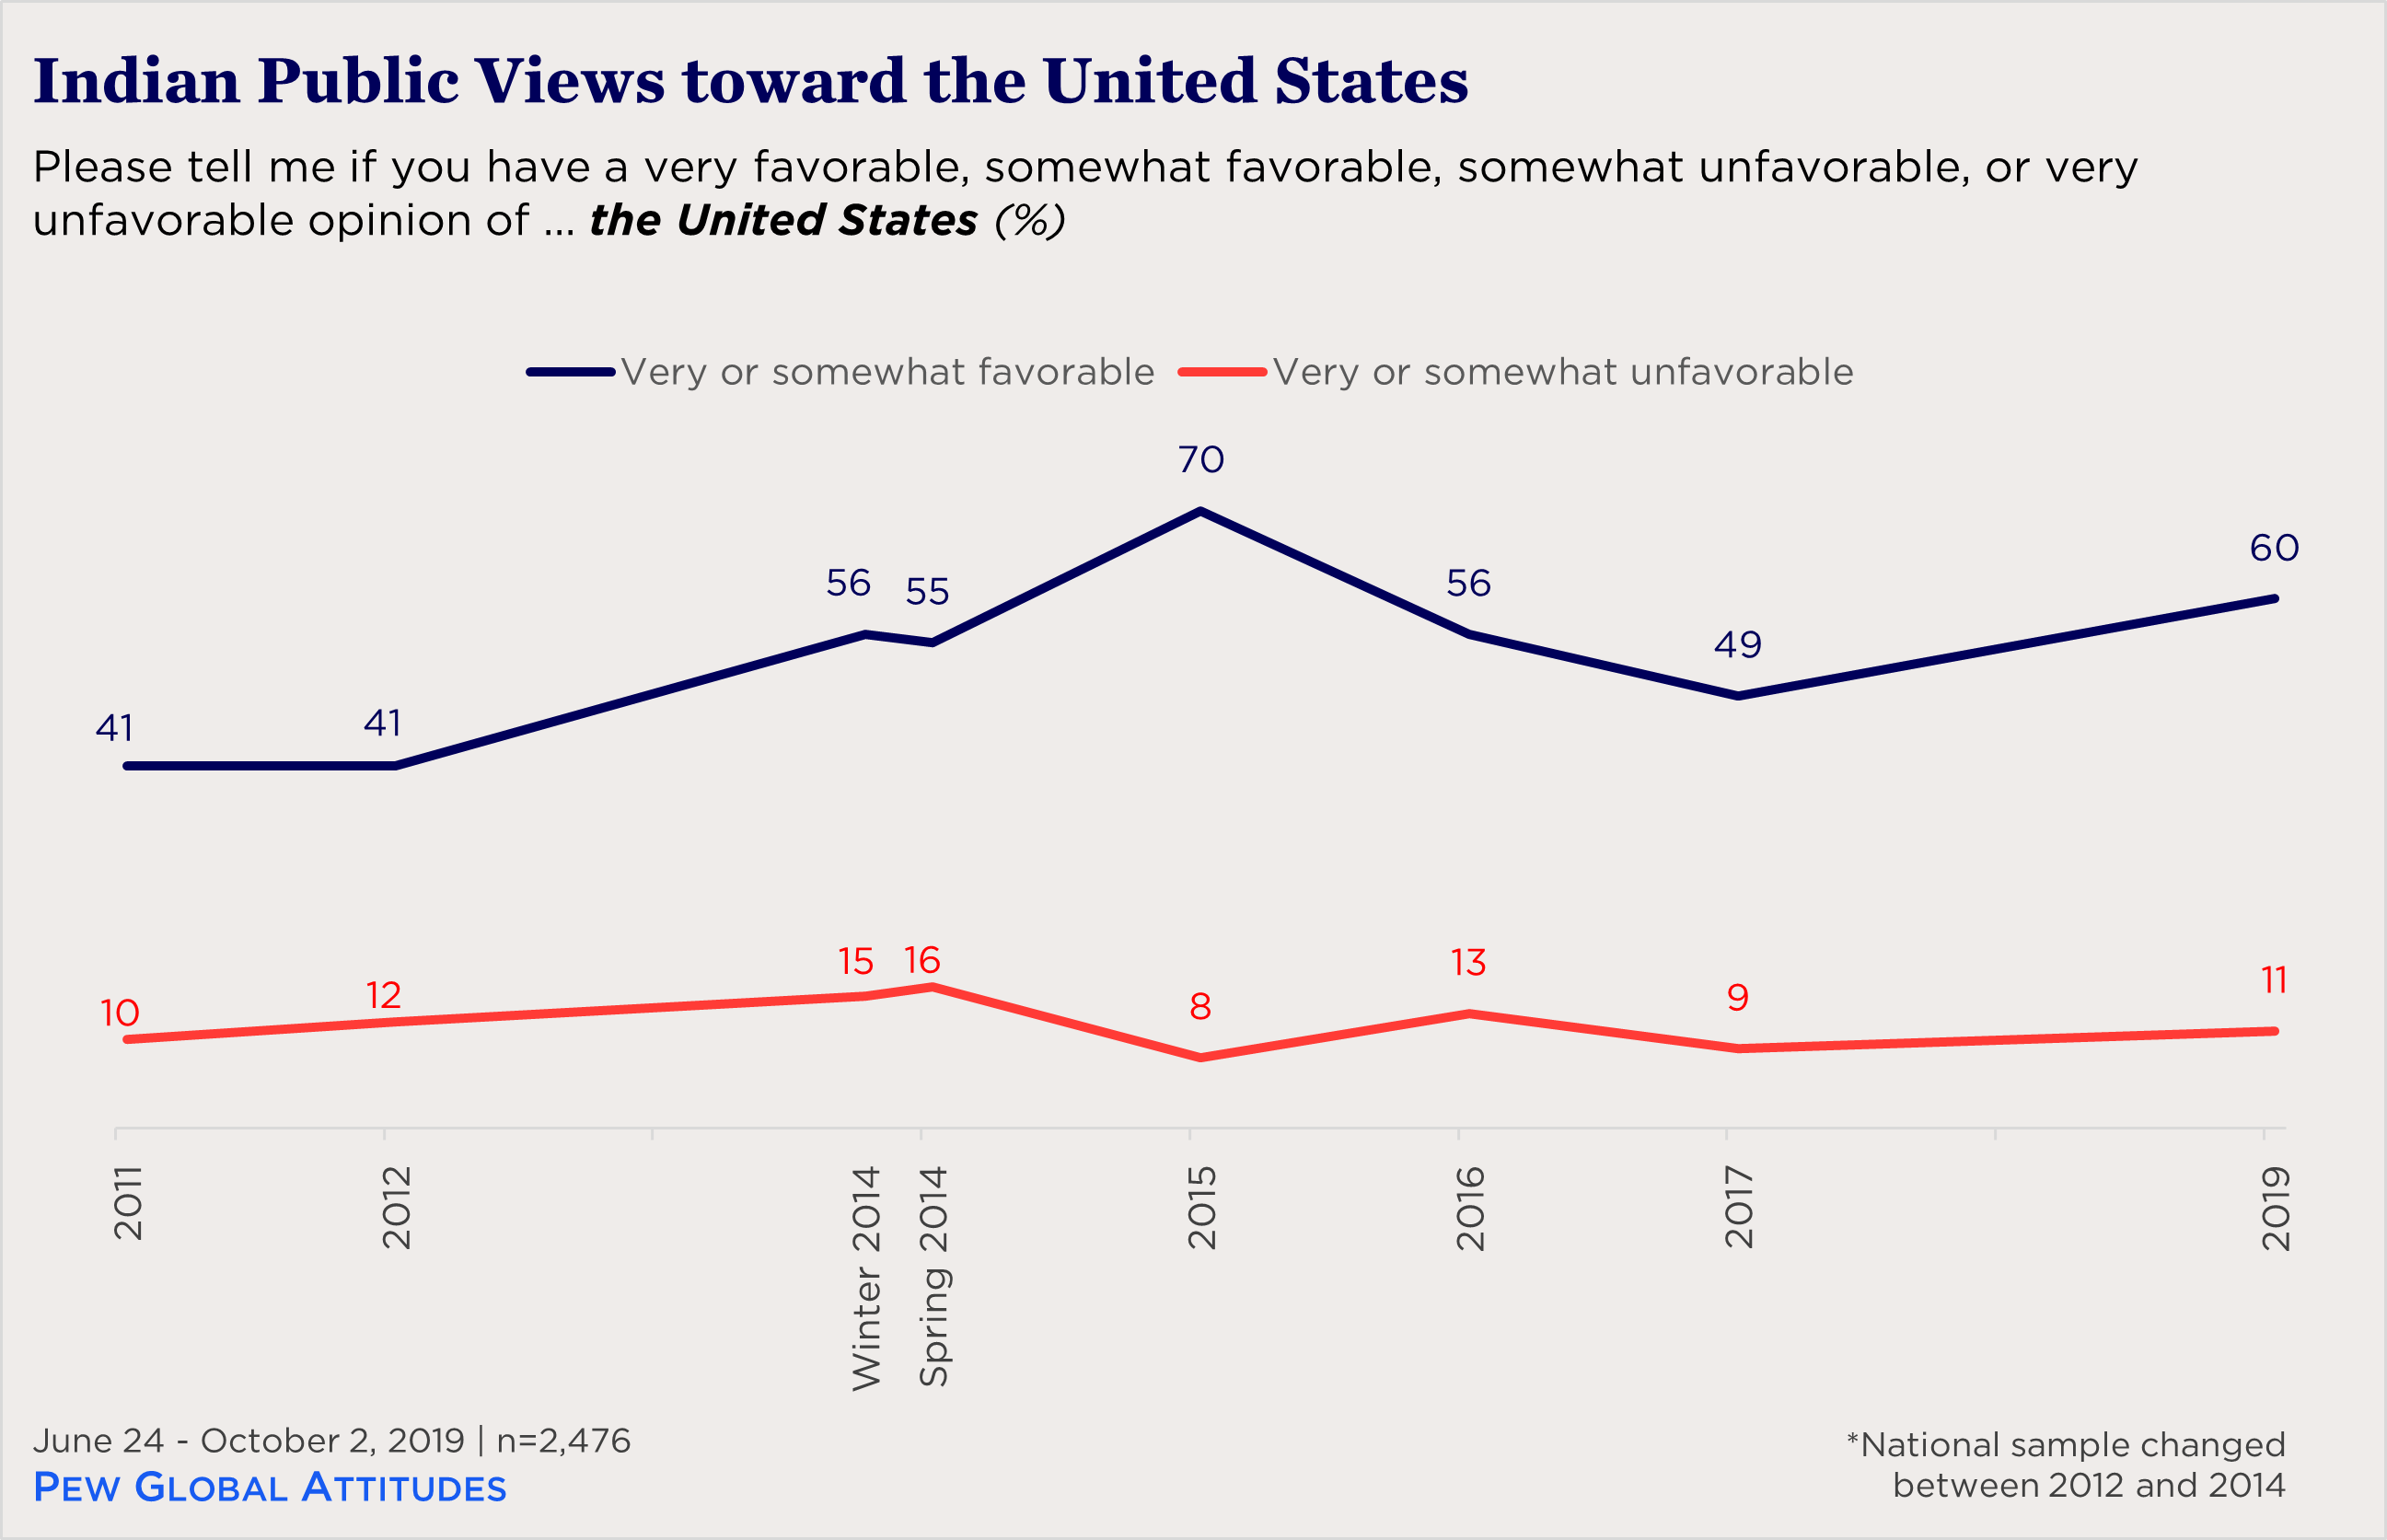 "line chart showing Indian public views toward the United States"